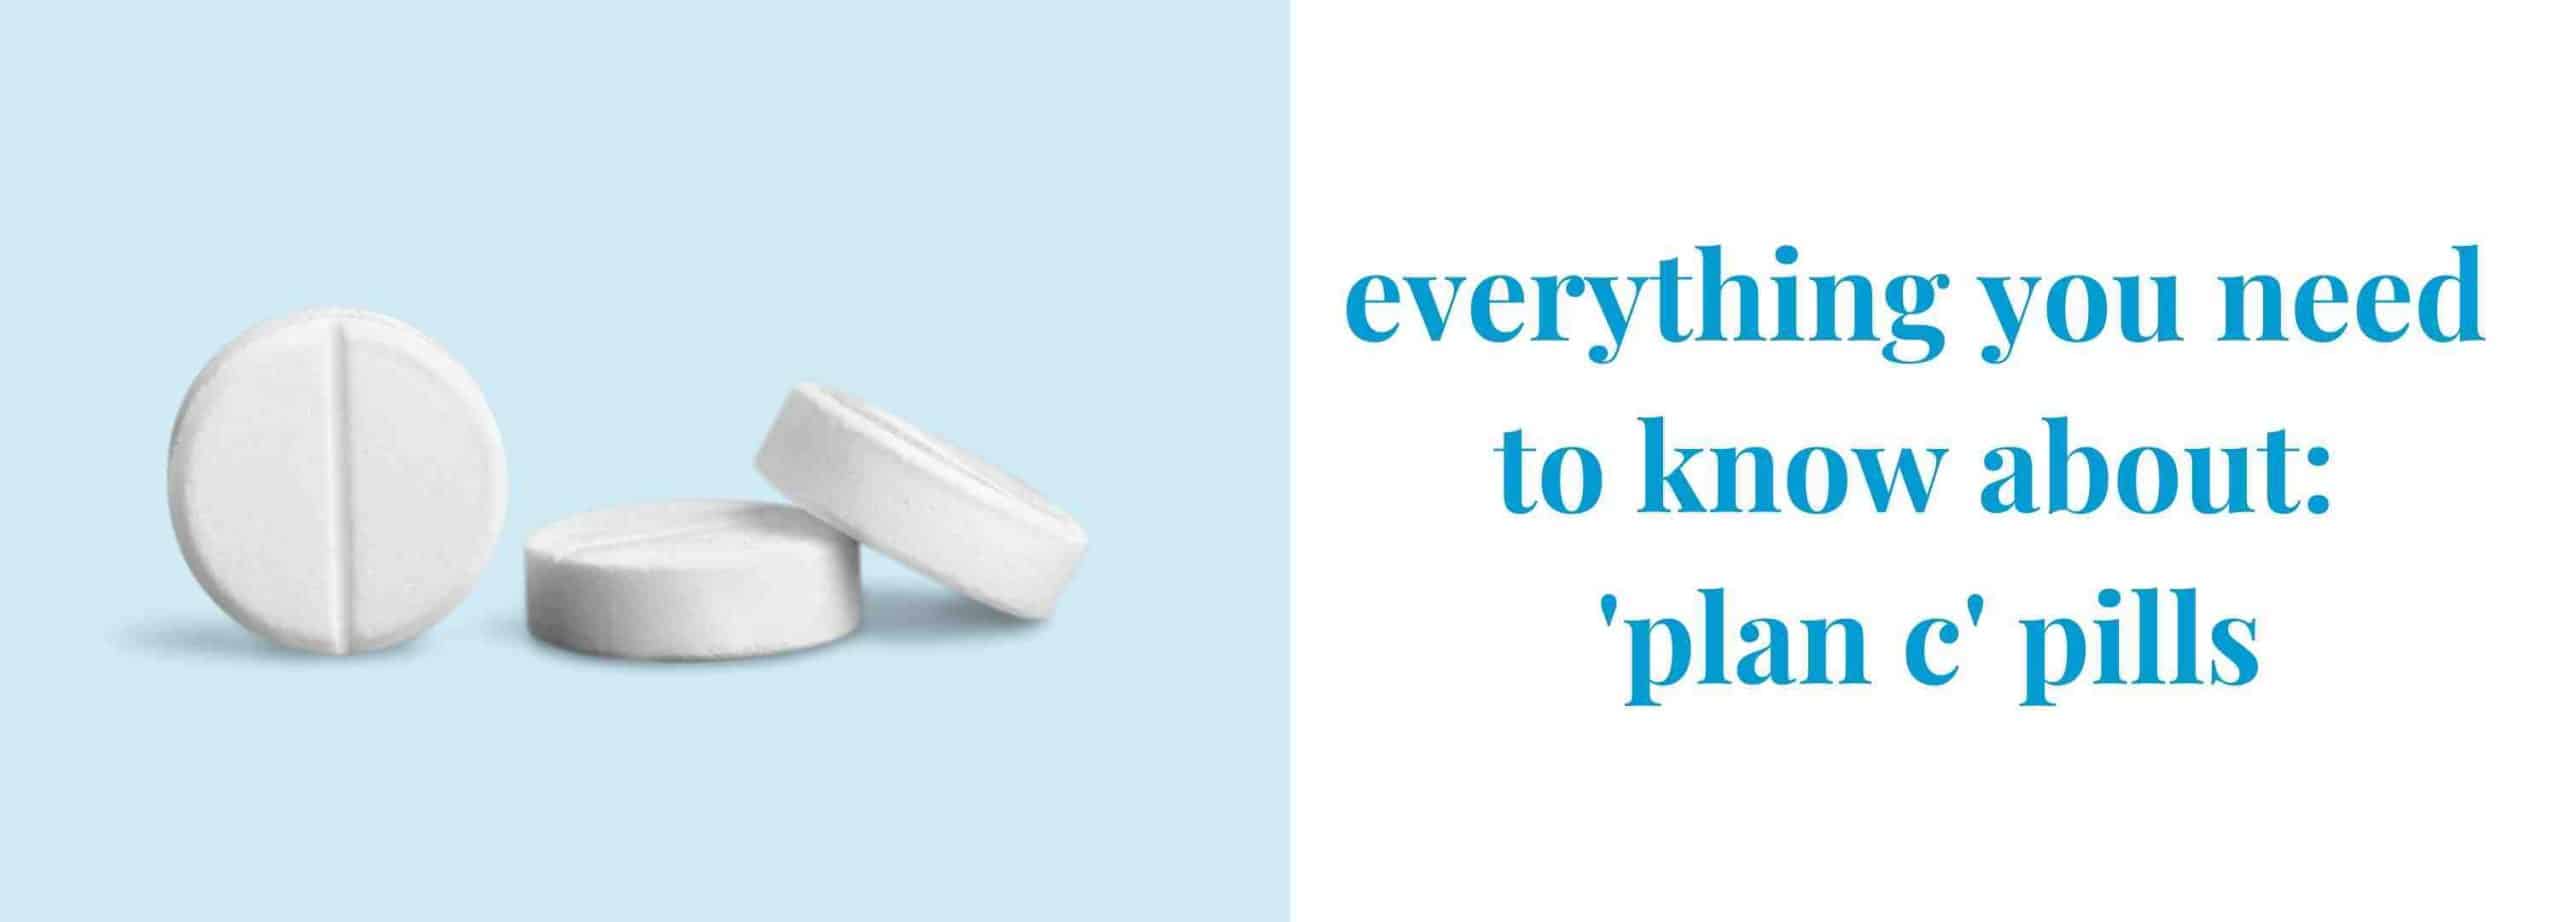 Plan C: everything you need to know about